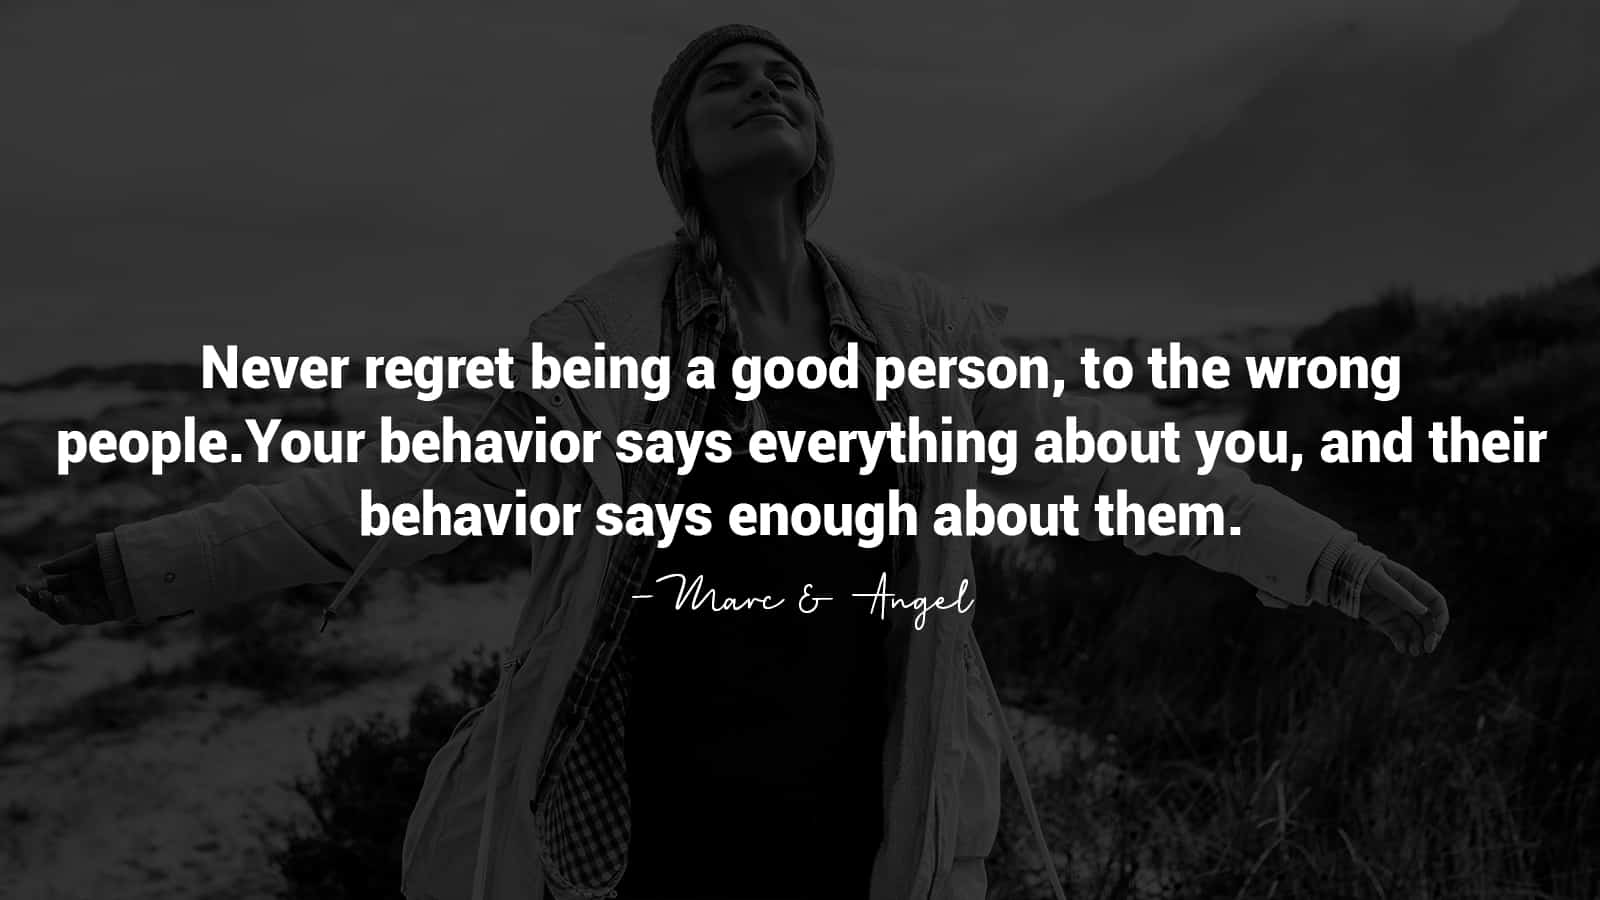 15 Quotes About Regret to Help You Let Go